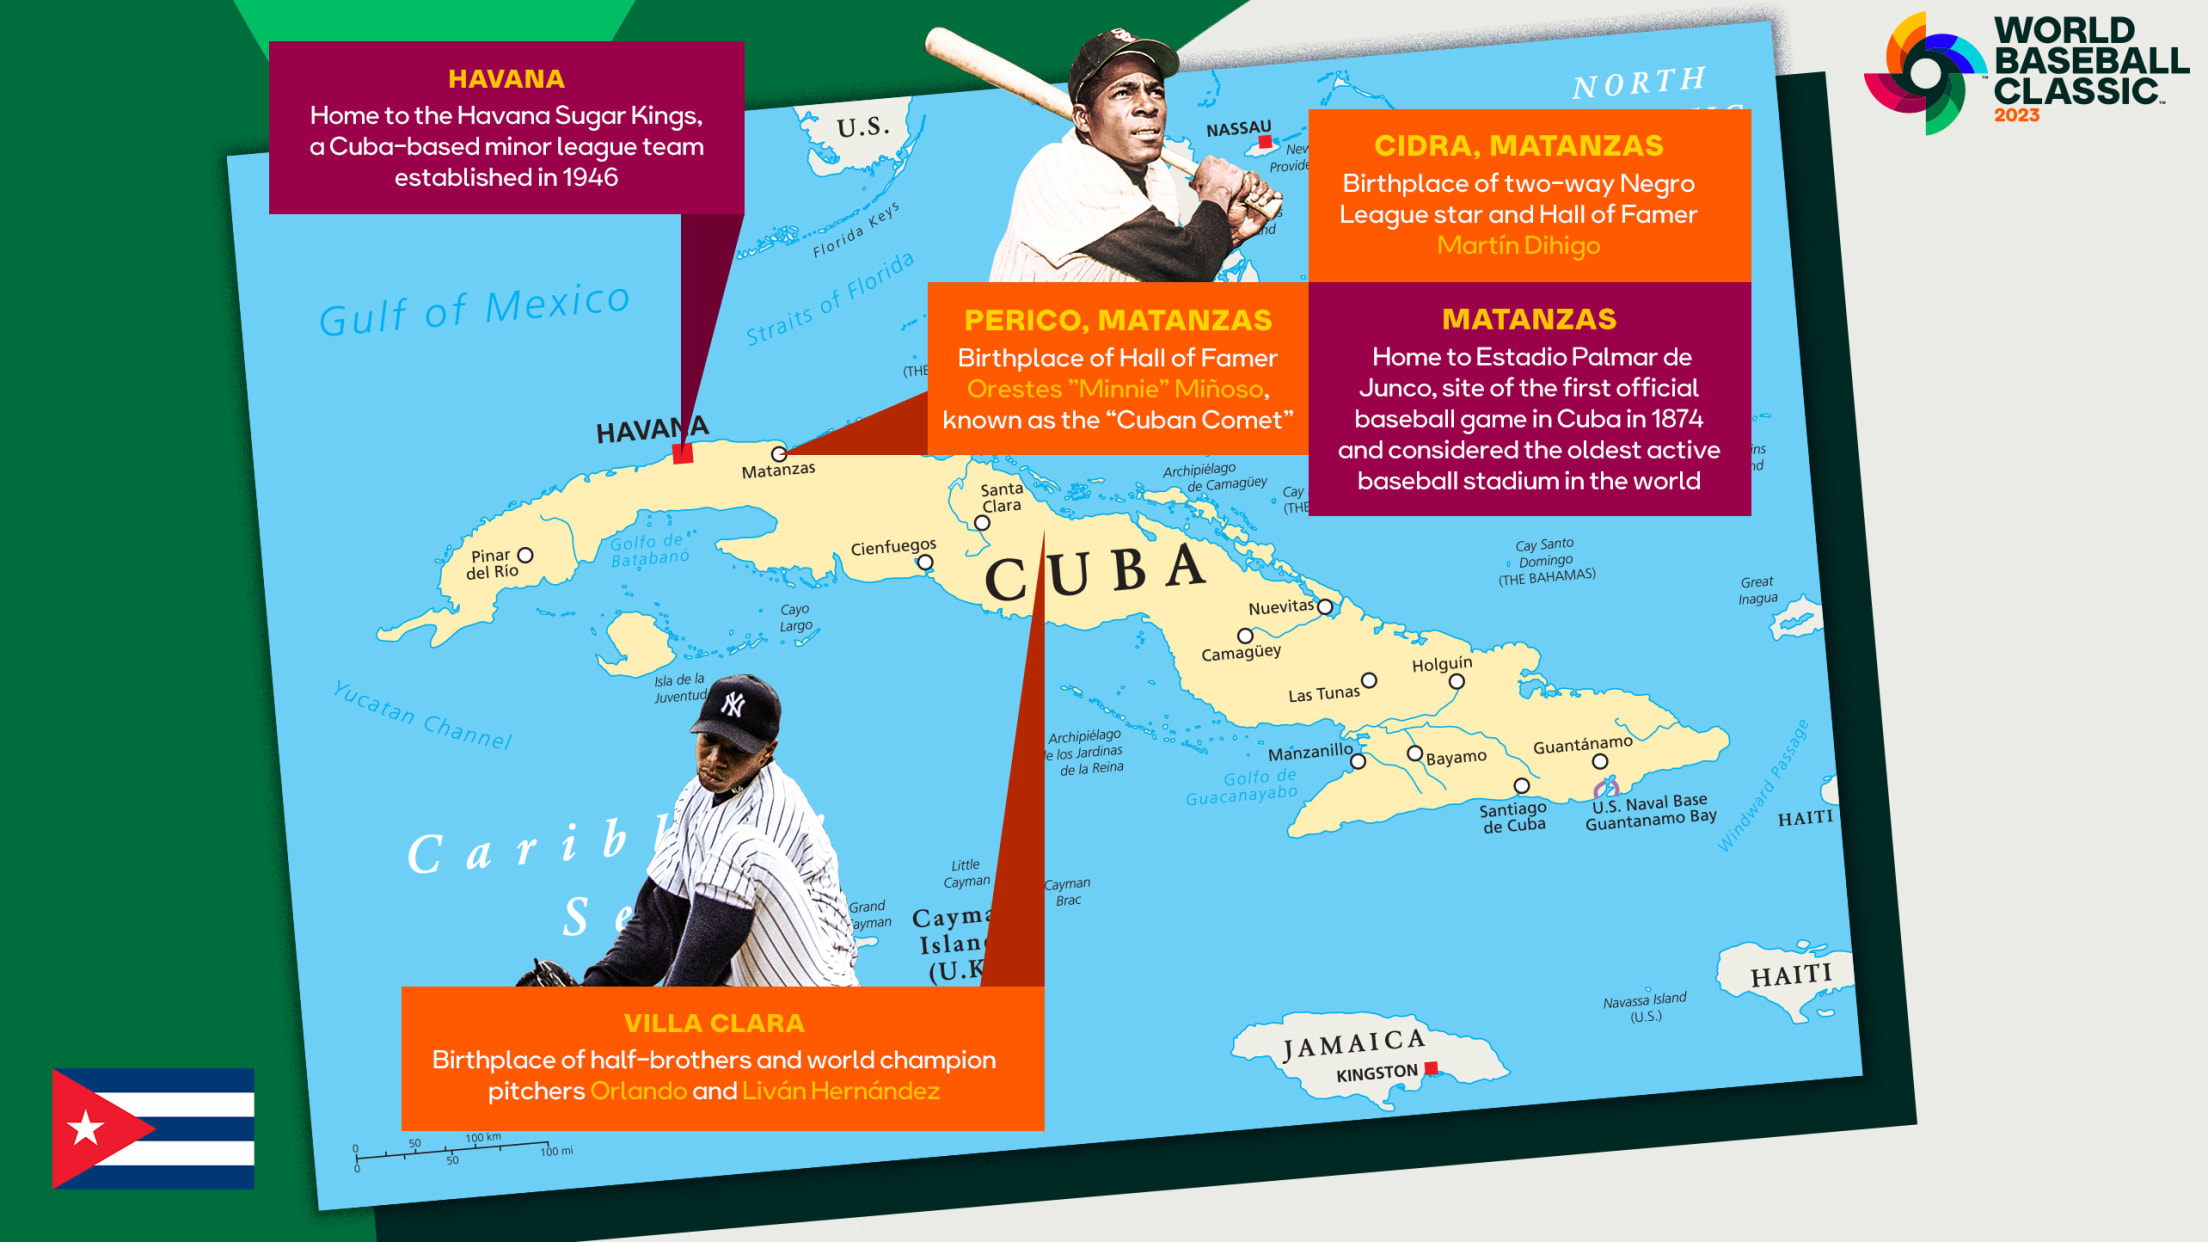 A graphic of a map of Cuba with images of two players and boxes pointing to several cities highlighting facts about the locations